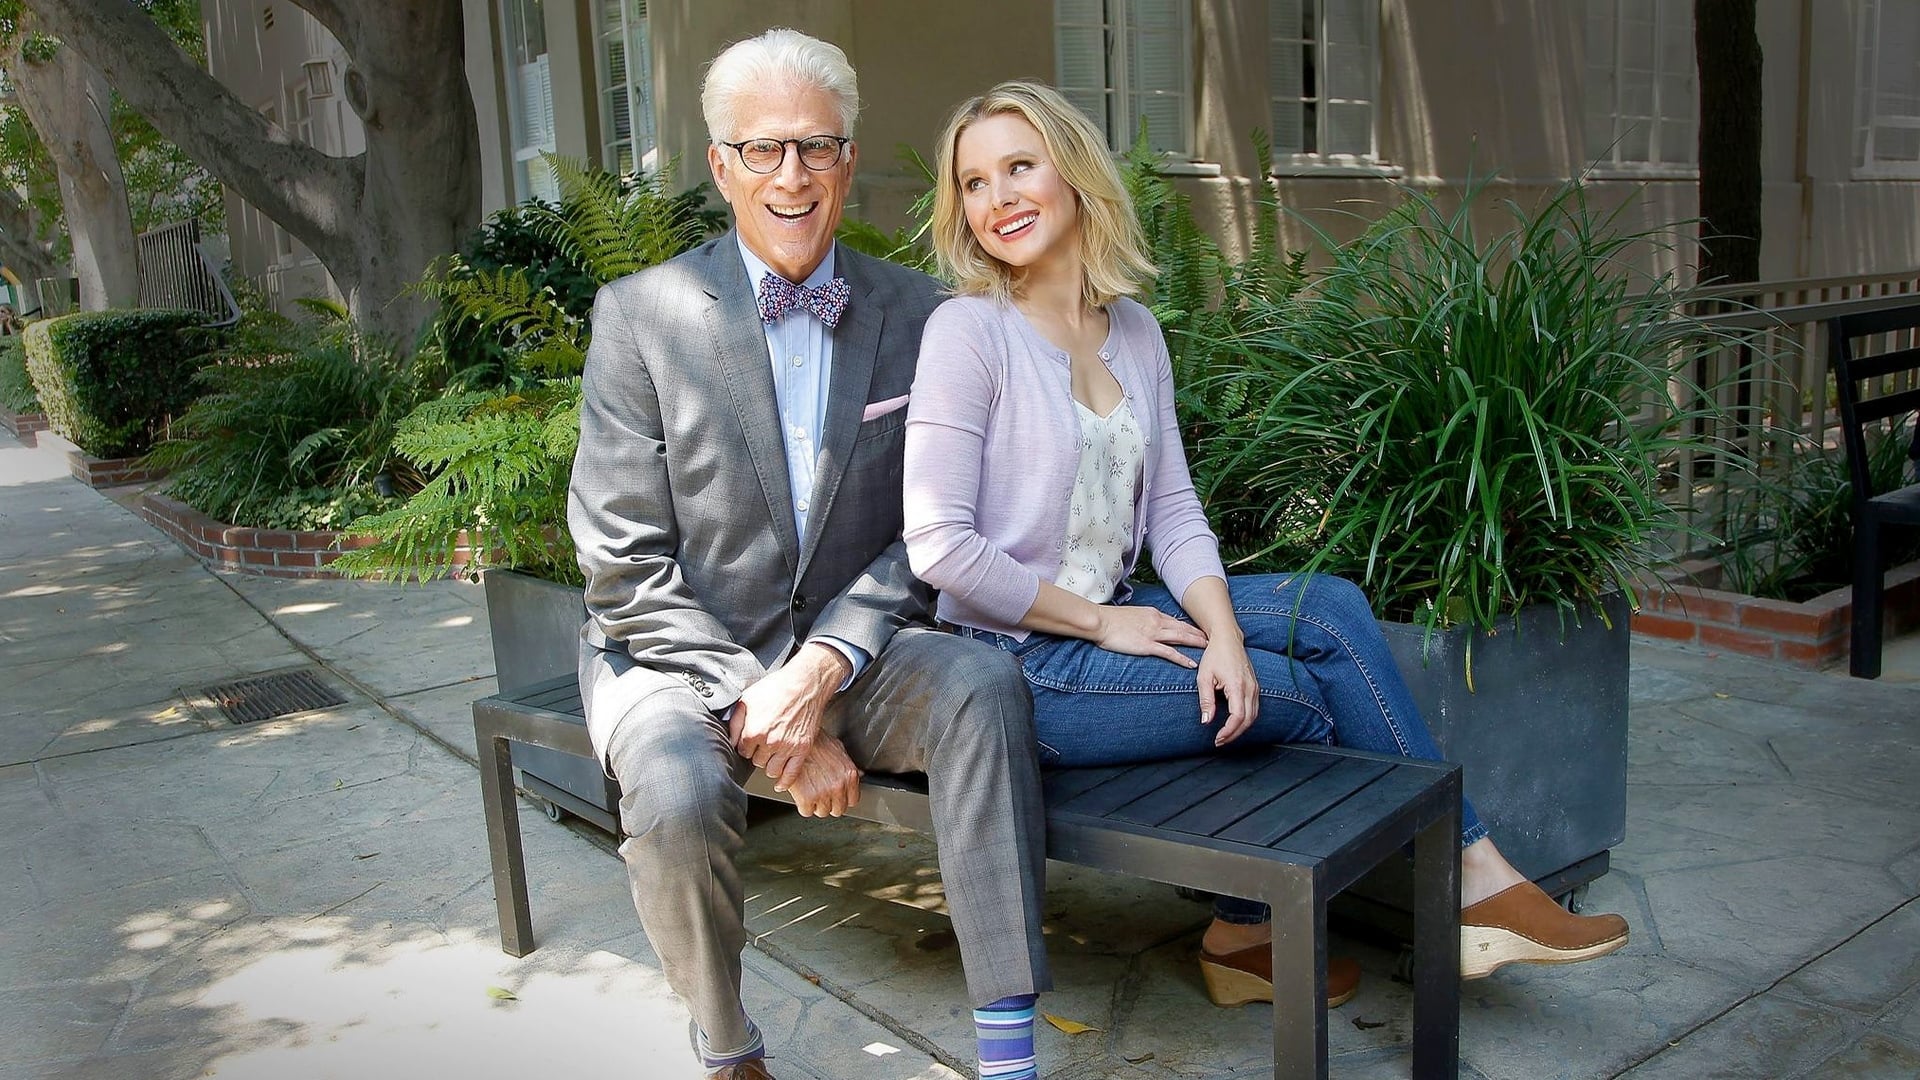 The Good Place 2016 123movies